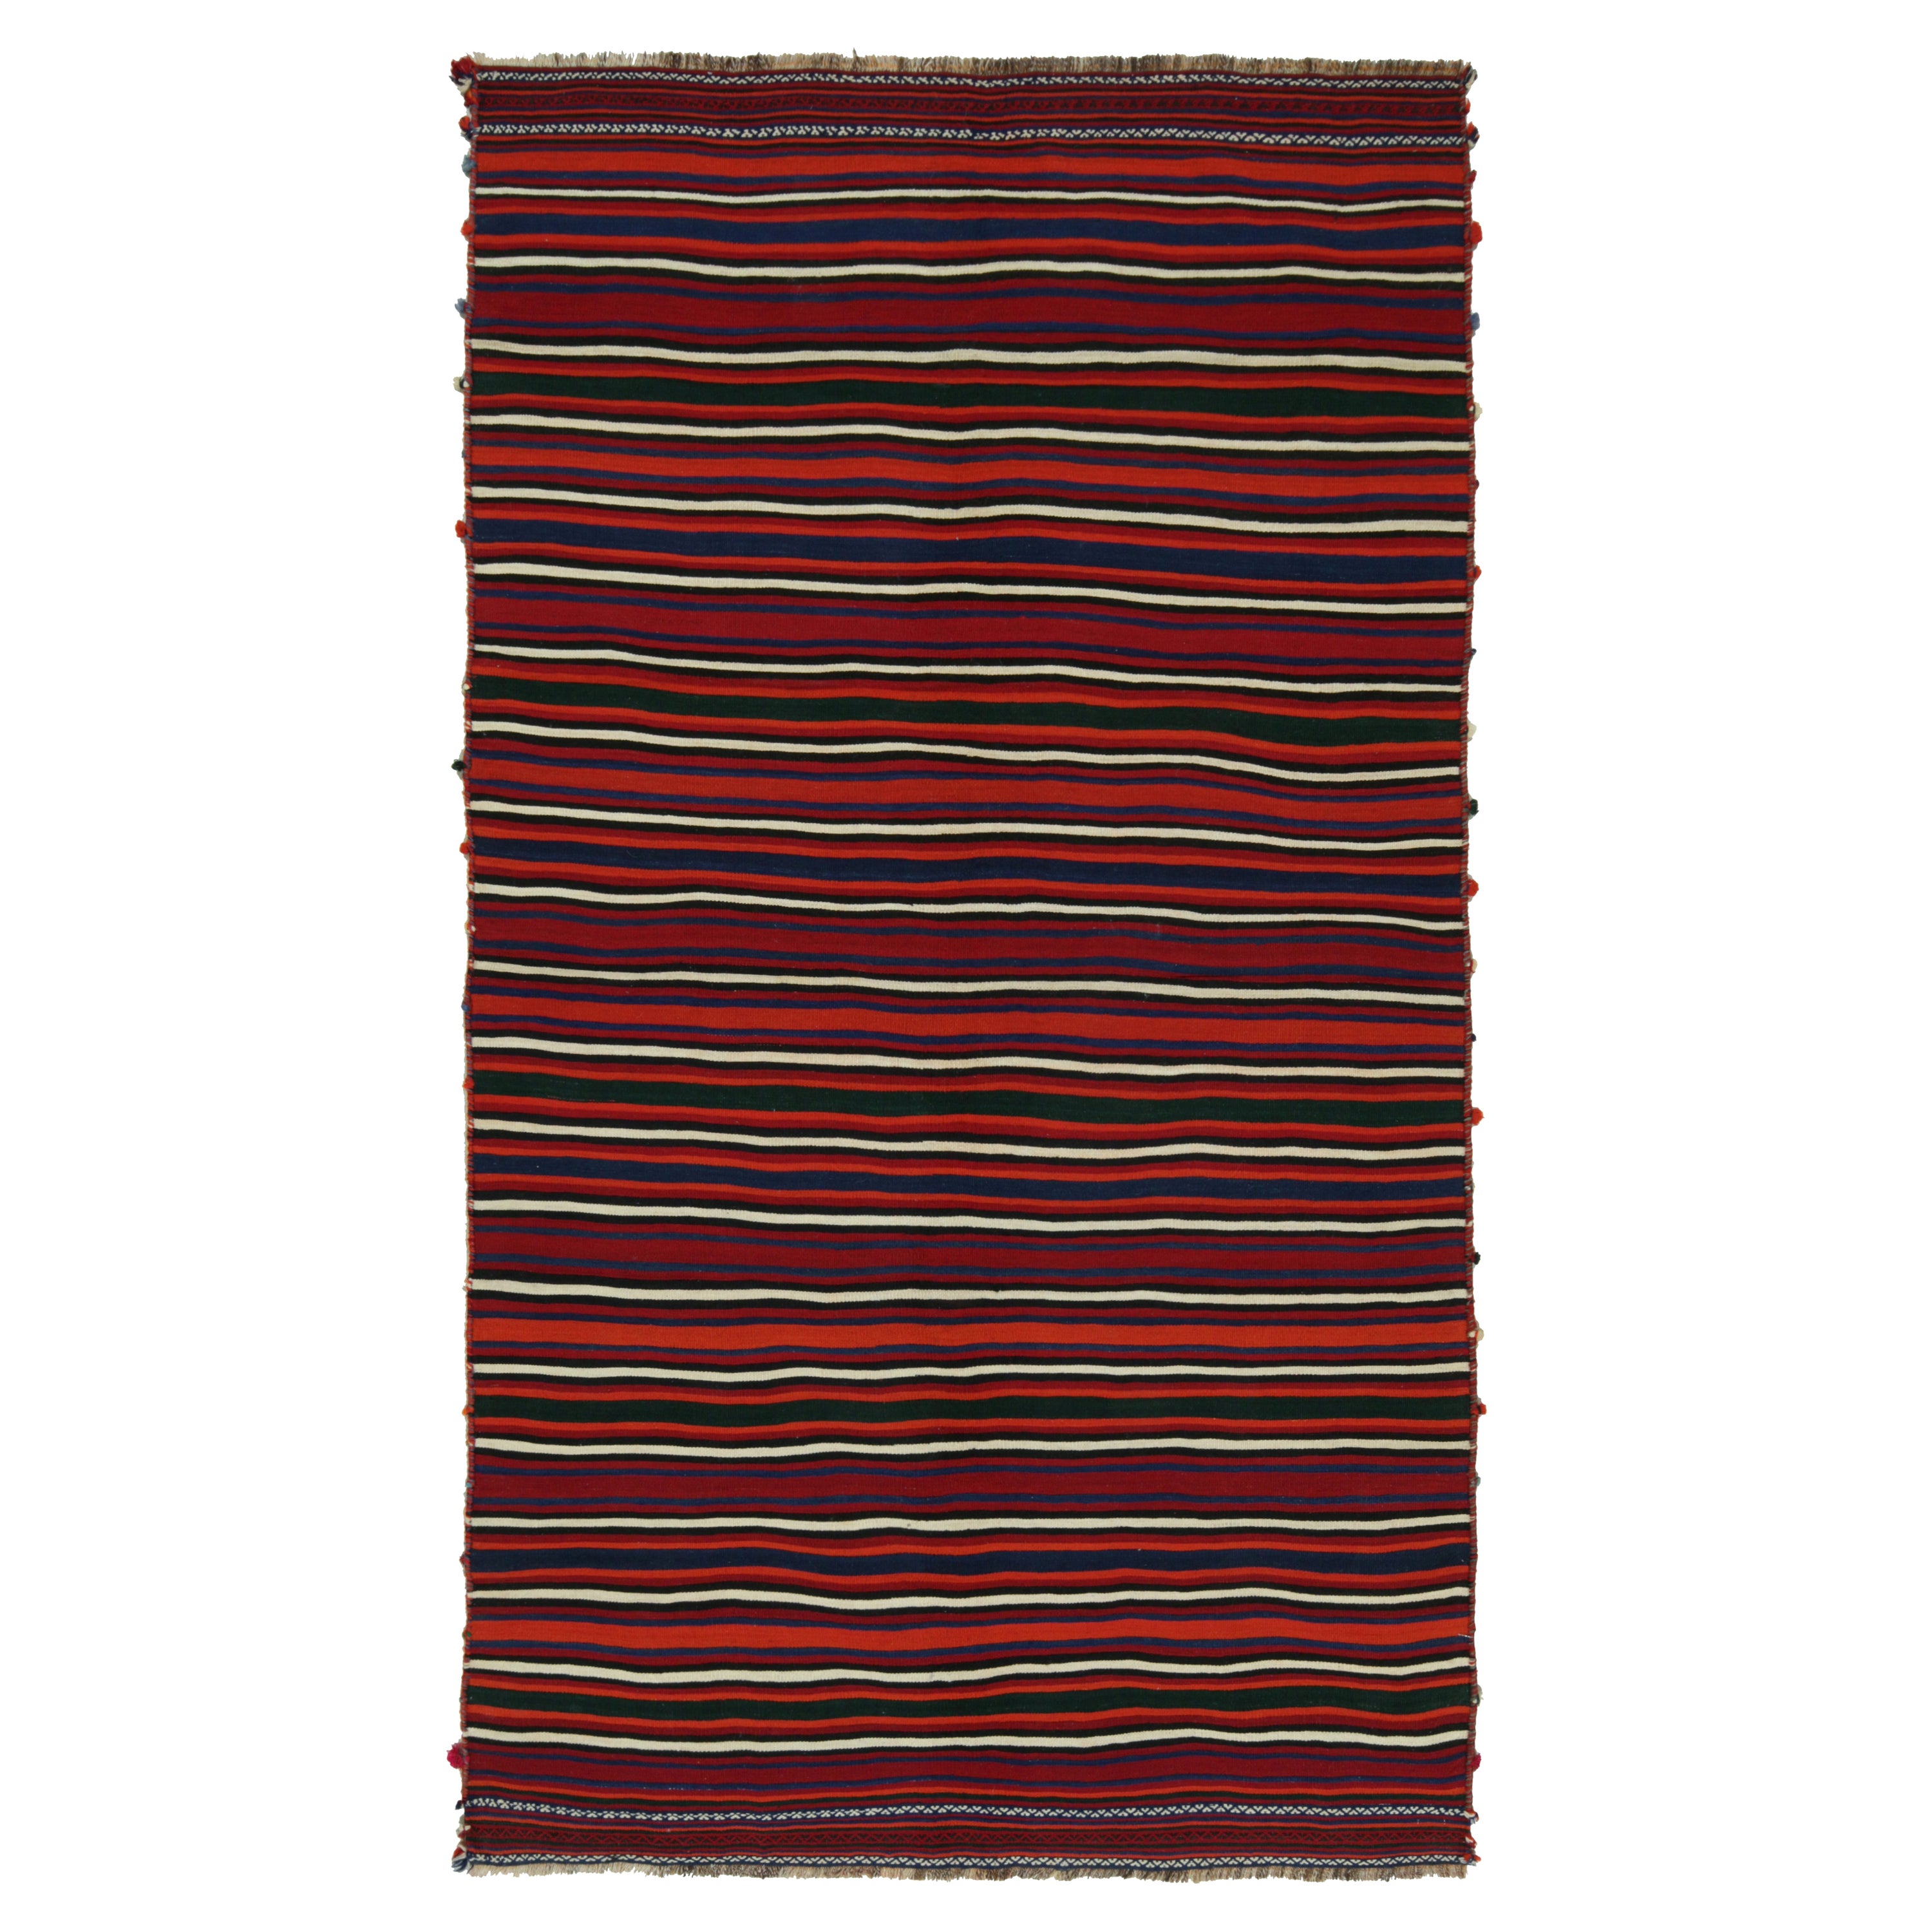 Vintage Persian Kilim Rug in Red, White, and Blue Stripes by Rug & Kilim